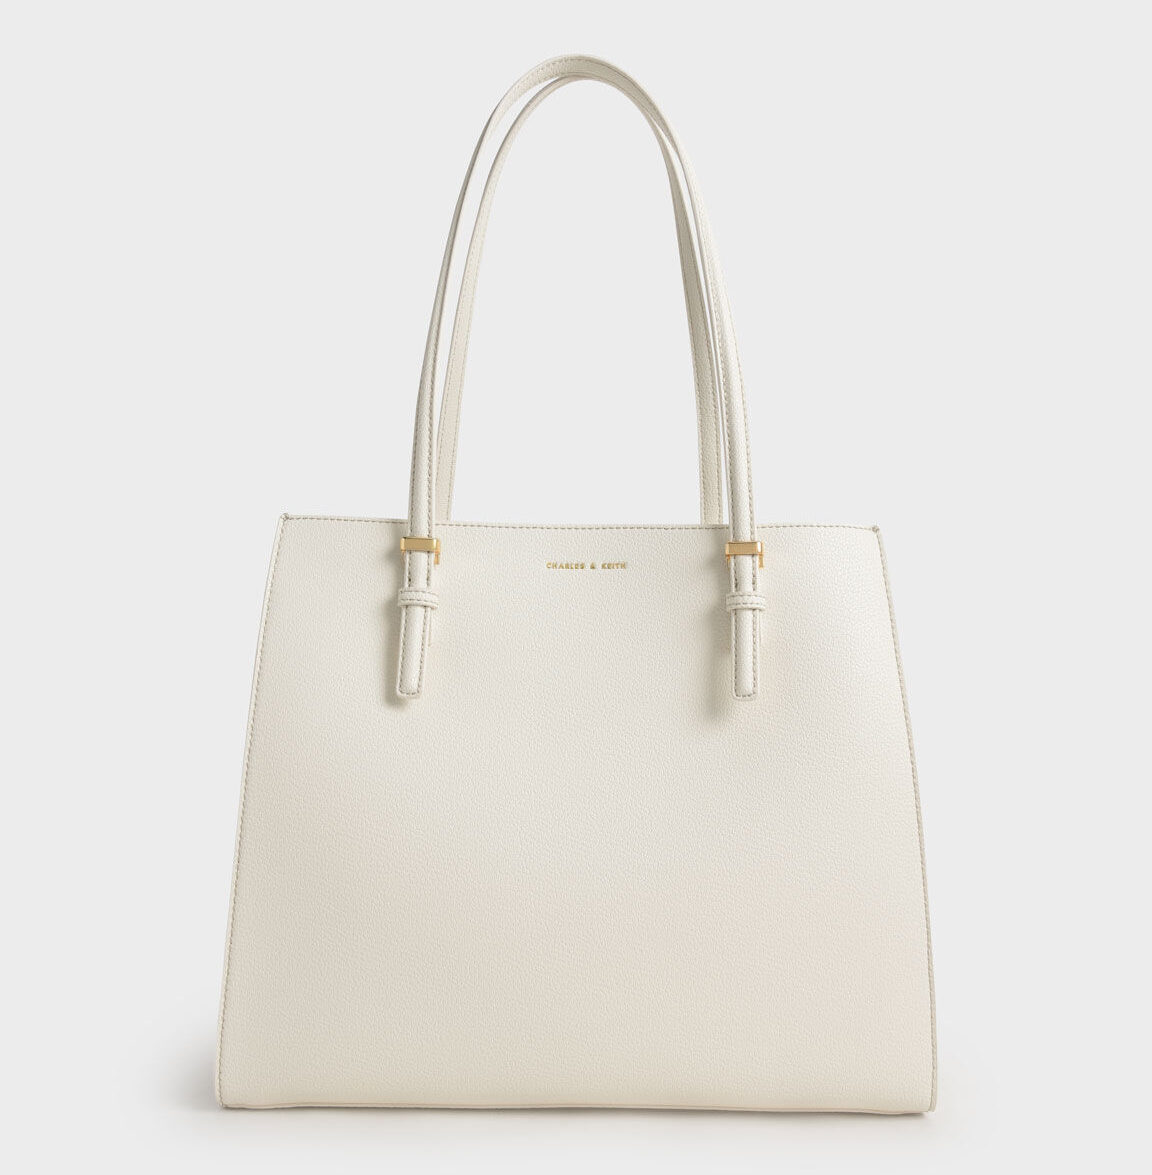 The best designer bags for laptops: Cream Large Double Handle Tote Bag